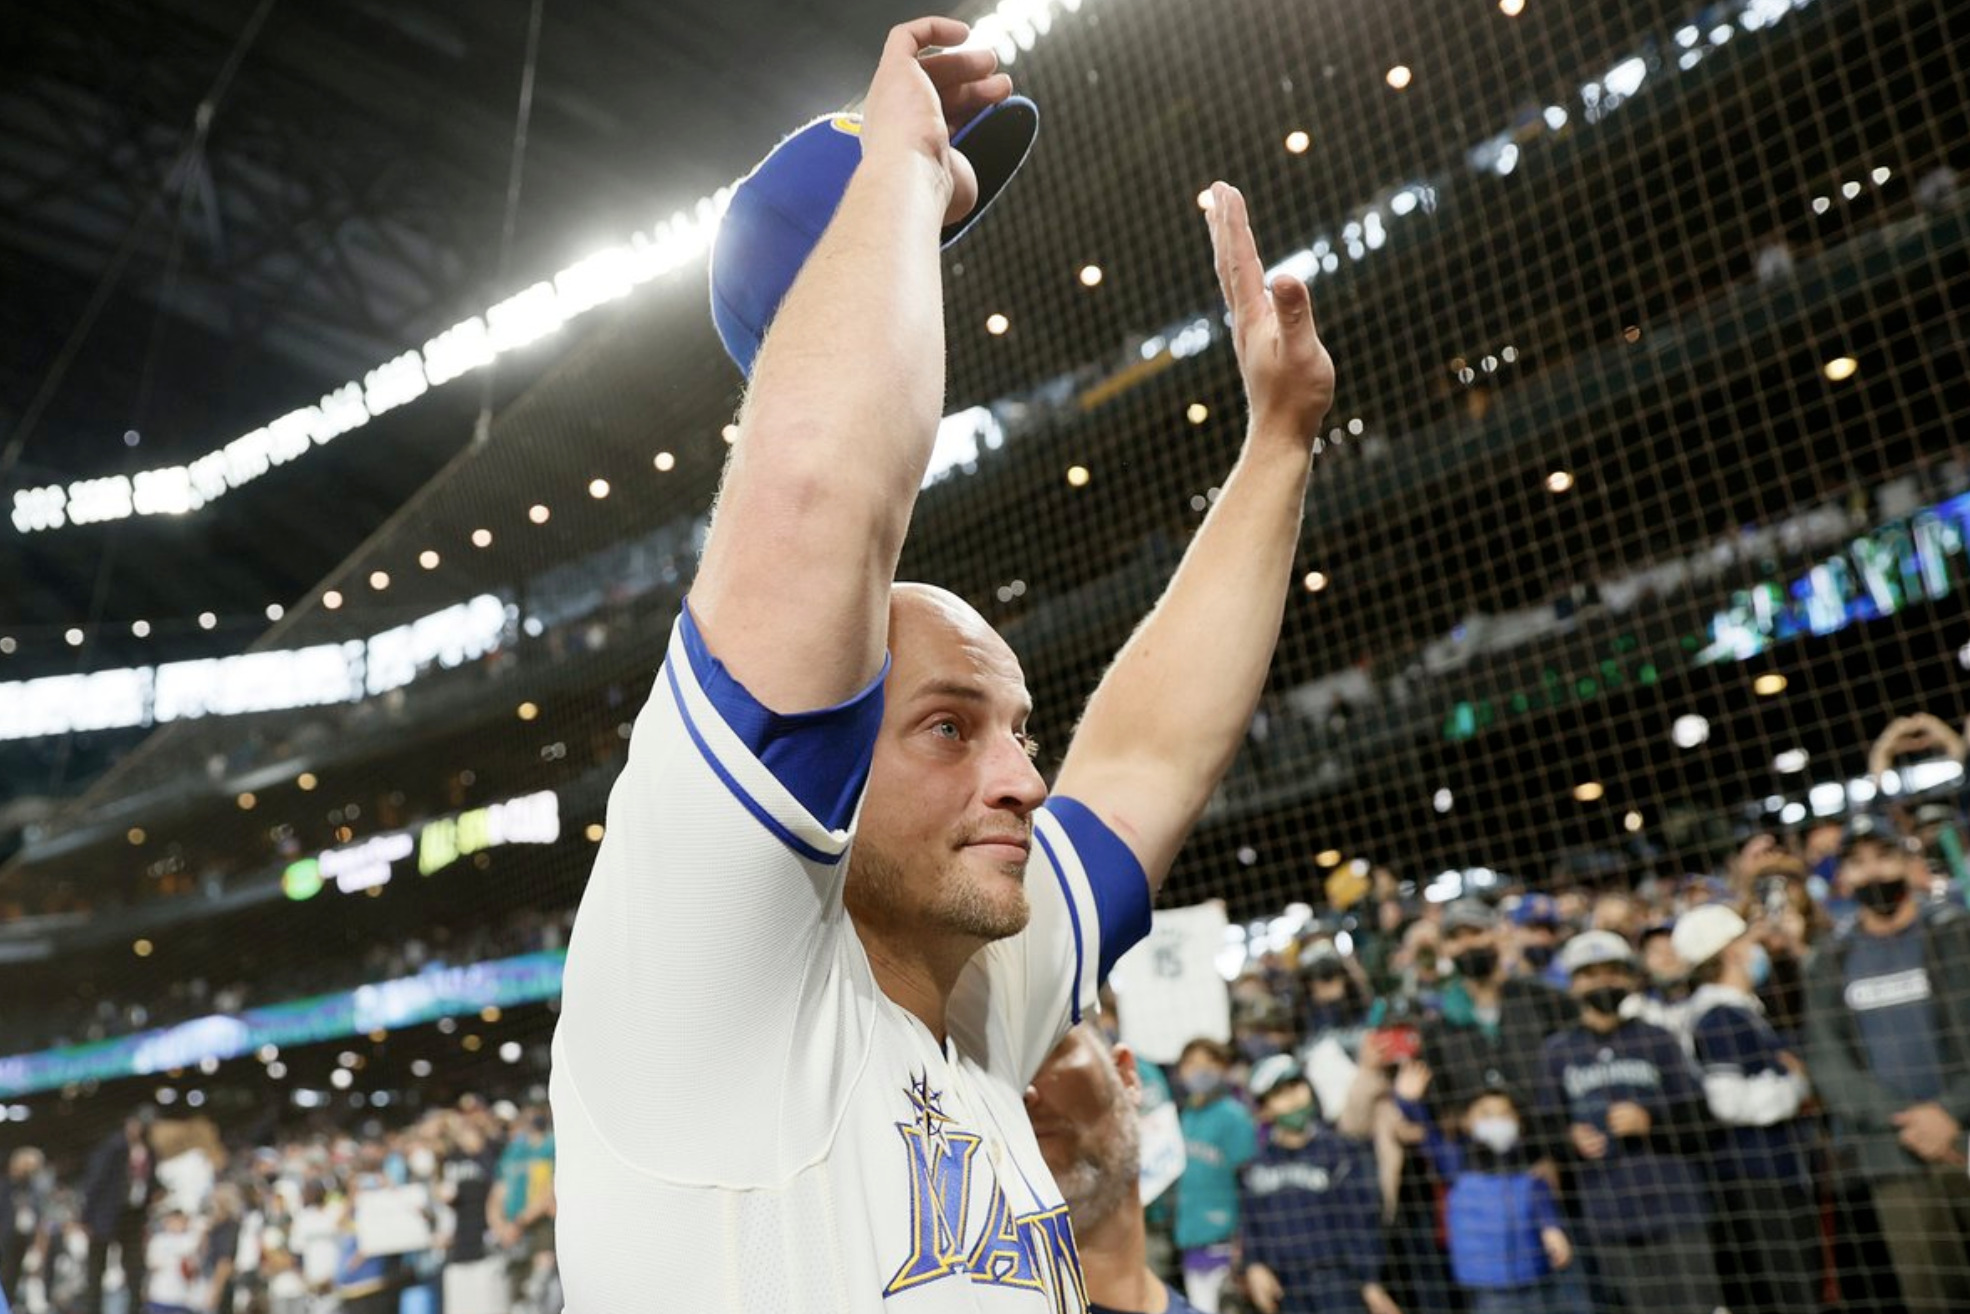 Cruz, Seager power Mariners to 6-5 win over Athletics